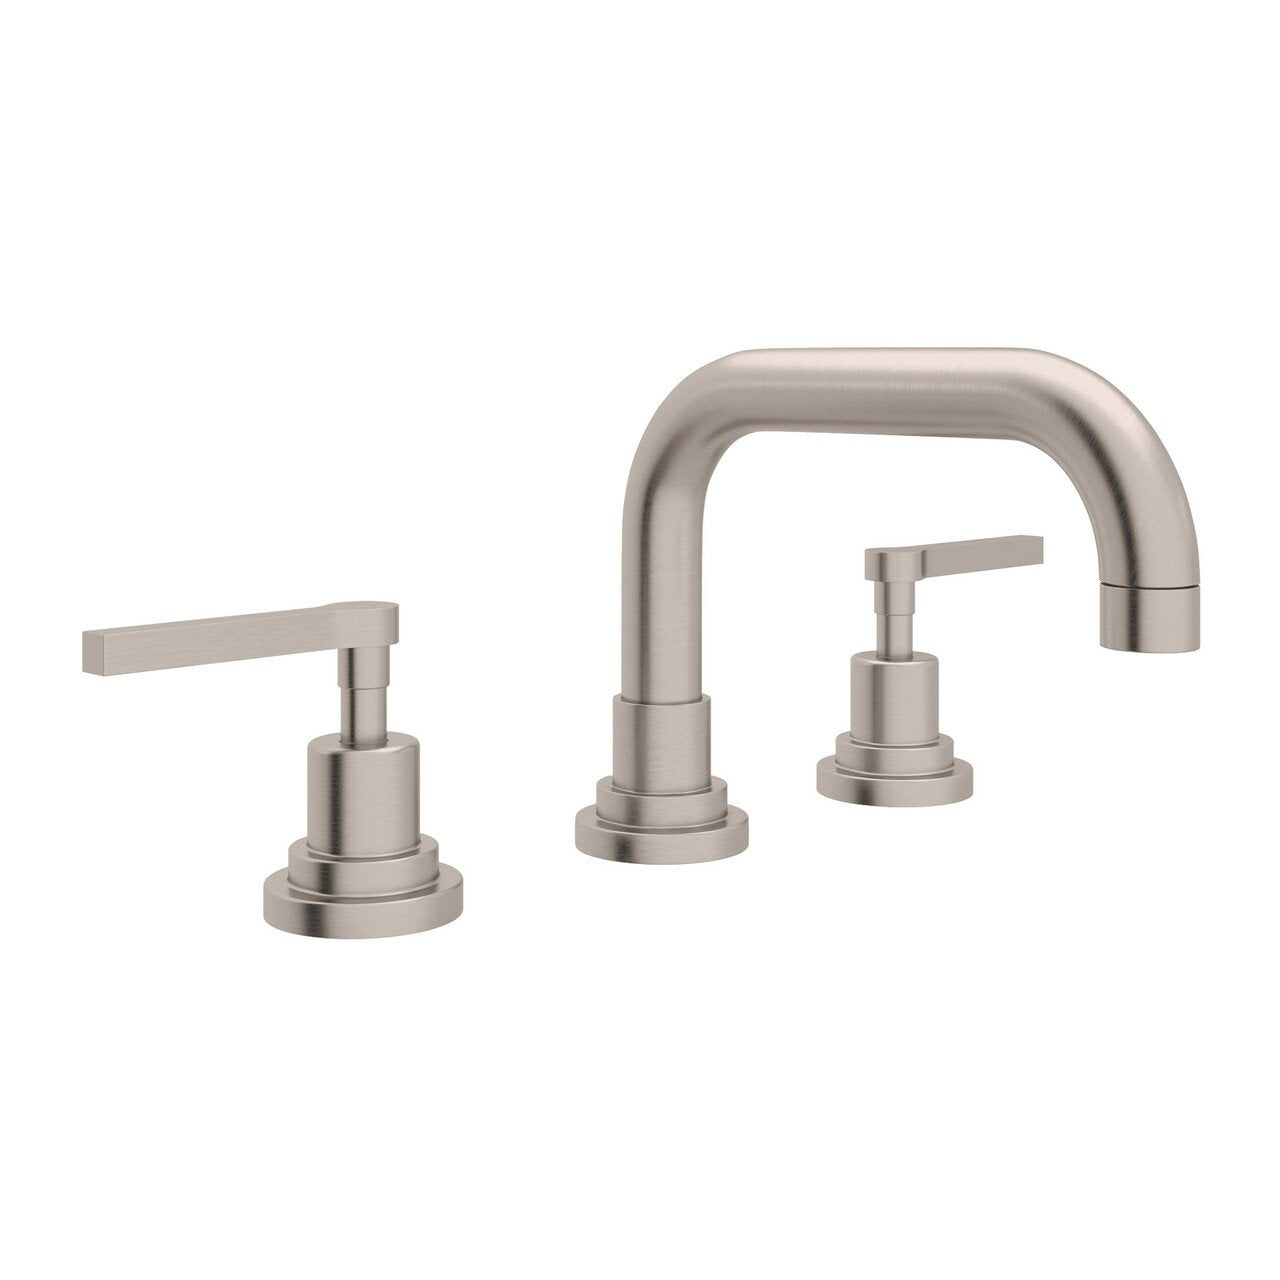 ROHL Lombardia U-Spout Widespread Bathroom Faucet - BNGBath